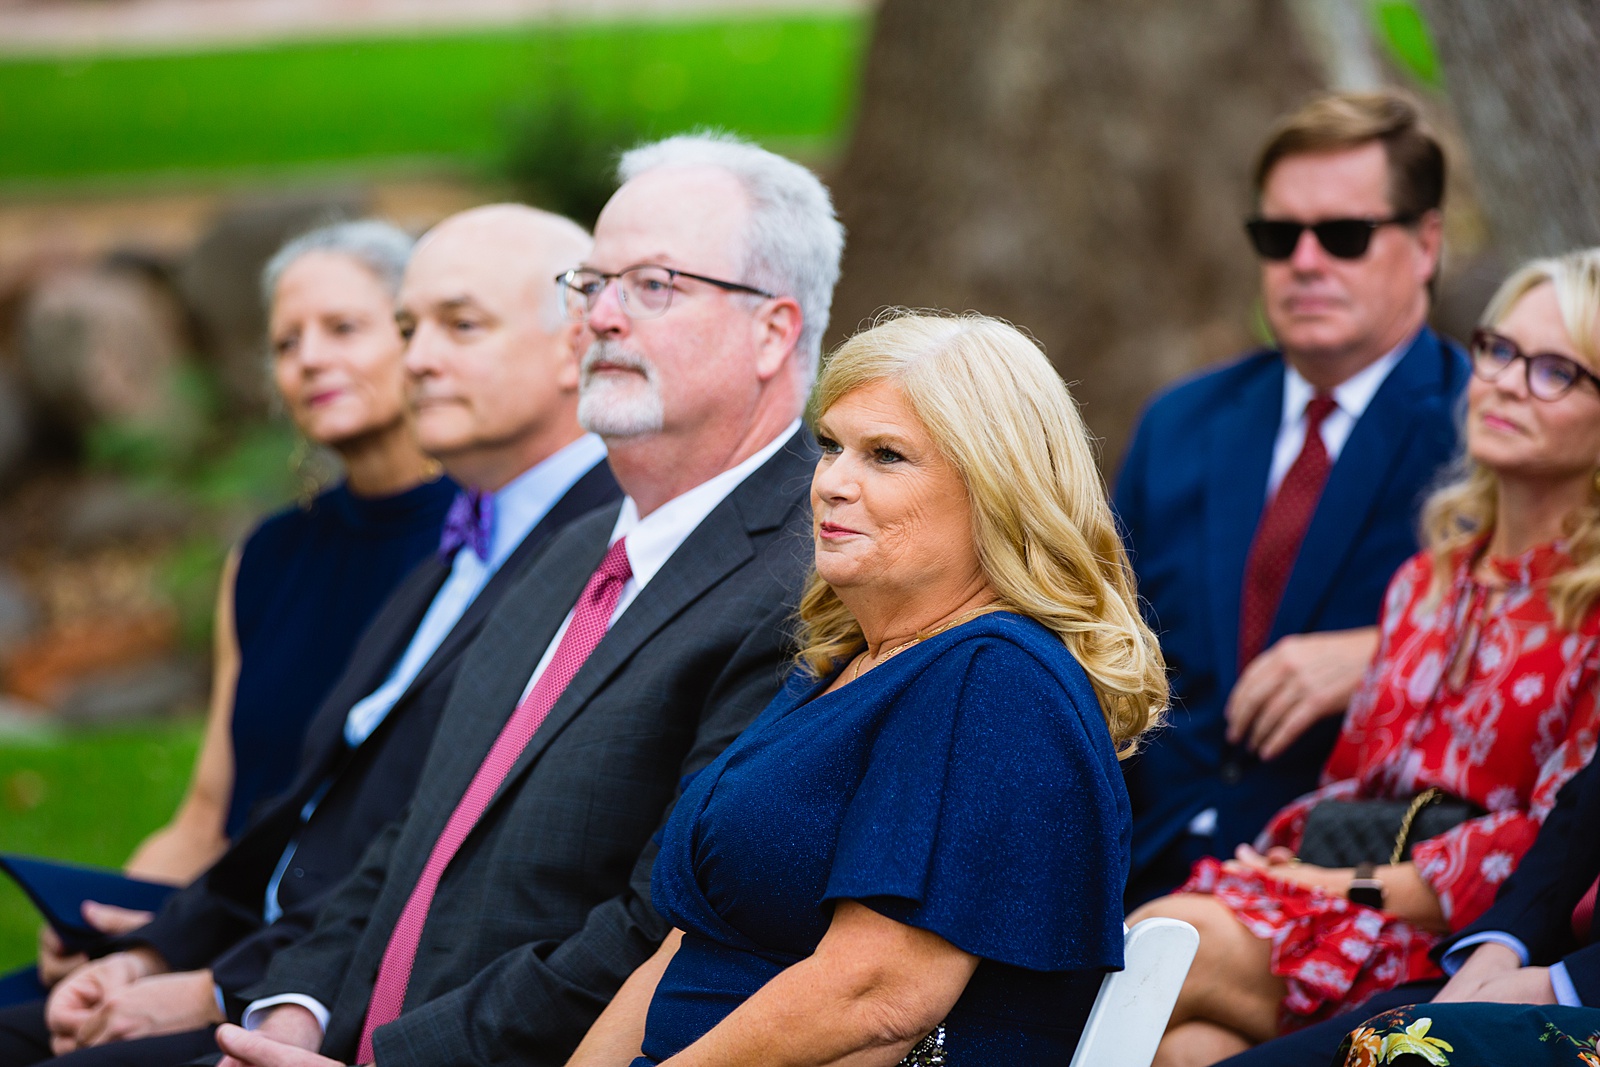 Wedding guests watching the wedding ceremony at Los Abrigados by Sedona wedding photographer PMA Photography.